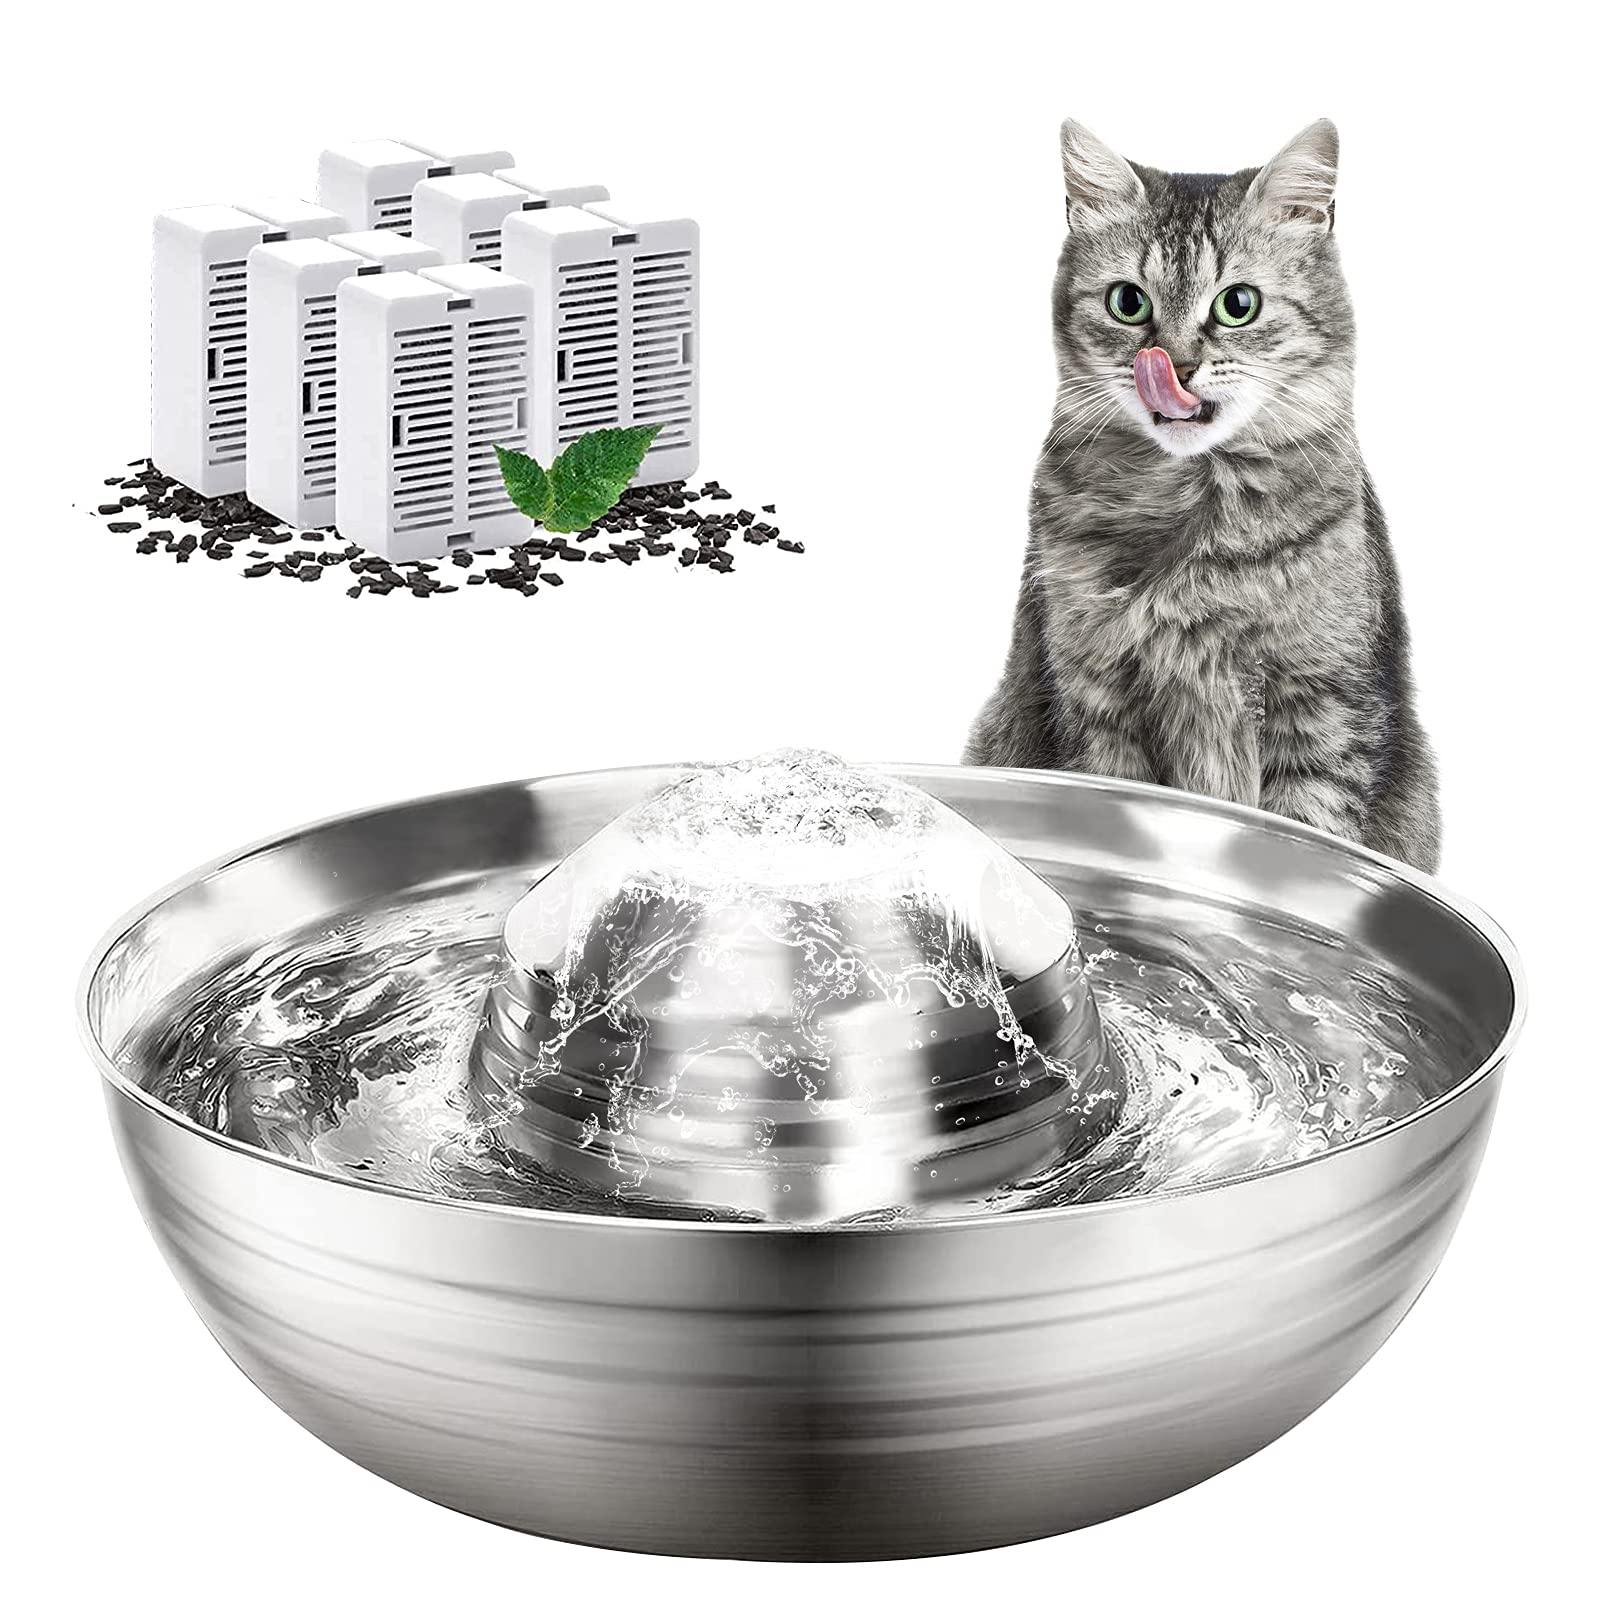 Cat Water Fountain Stainless Steel, Super Quiet Adjustable Water Flow Pet Water Fountain,67oz/2L Automatic Water Dispenser for Cats&Dogs, 360 ° Ope...